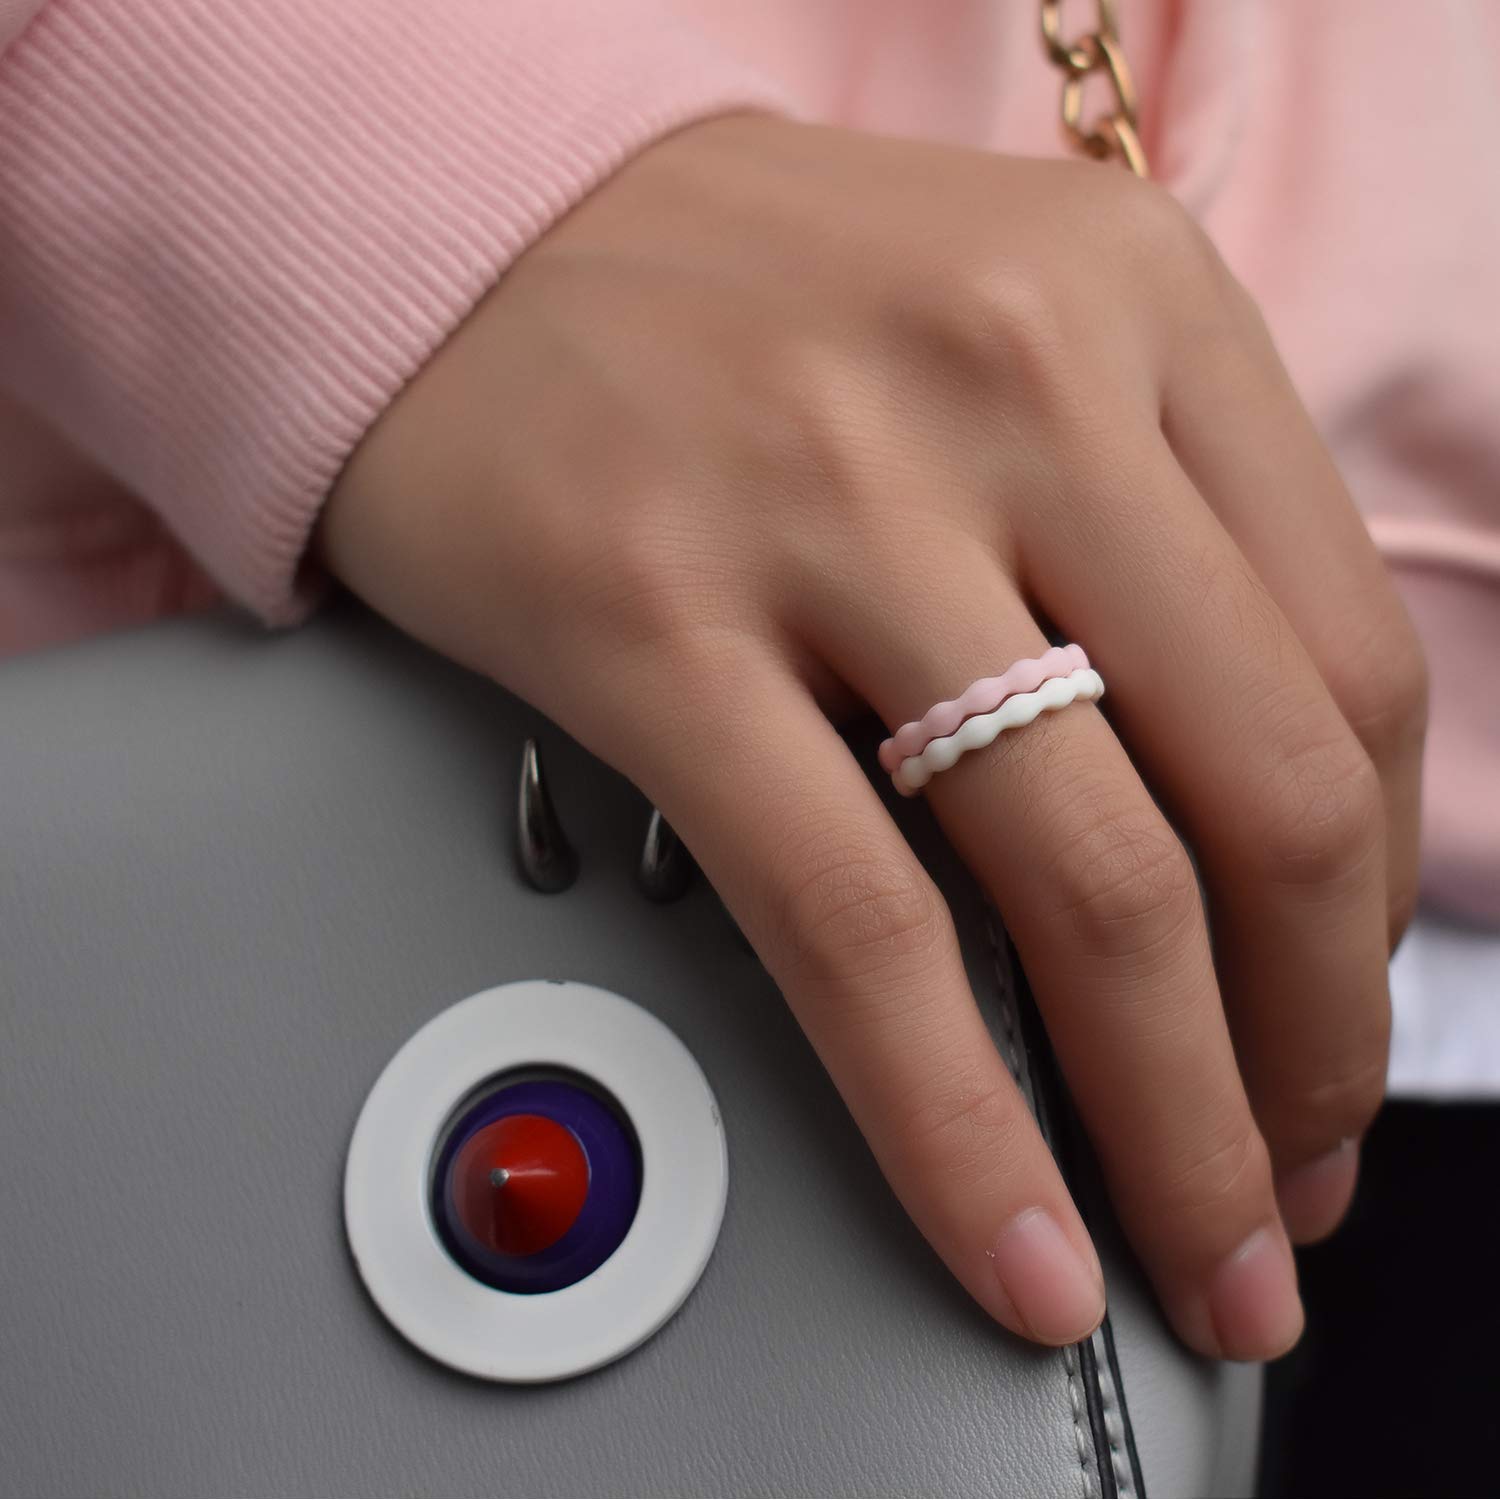 Woman holding her purse wearing our stackable Wavy Women's Silicone Rings. The Best Silicone Wedding Rings For Women Online.